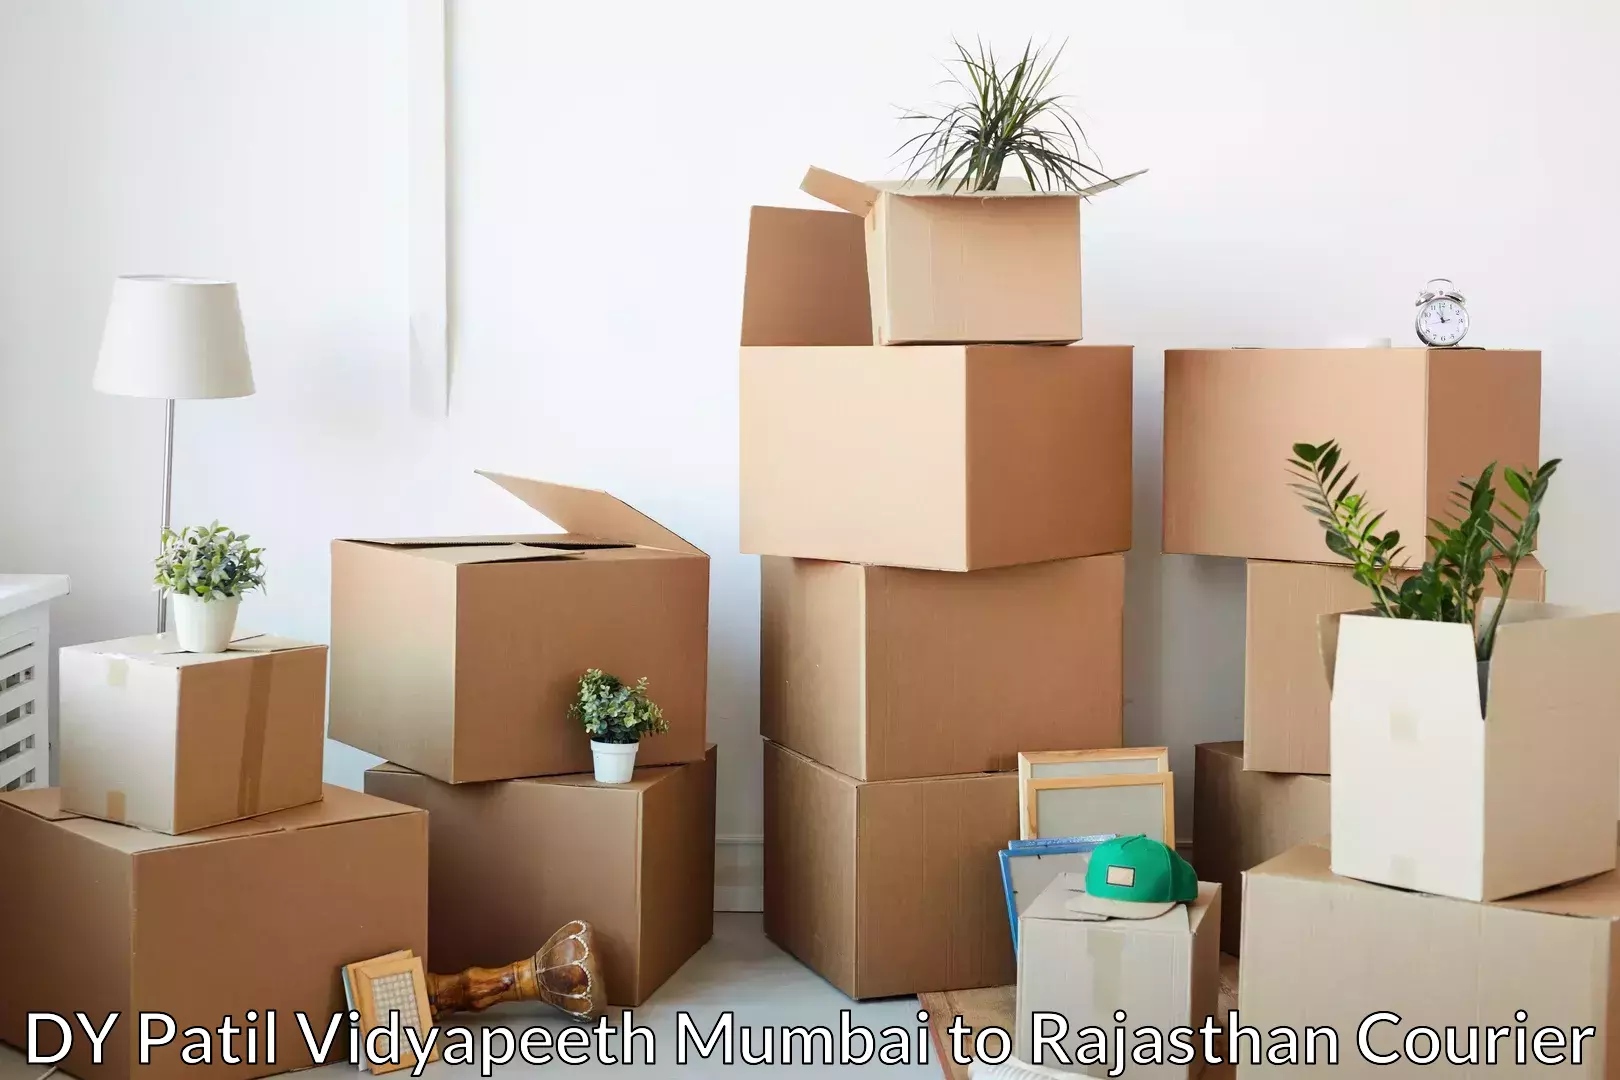 Budget-friendly moving services in DY Patil Vidyapeeth Mumbai to Suratgarh